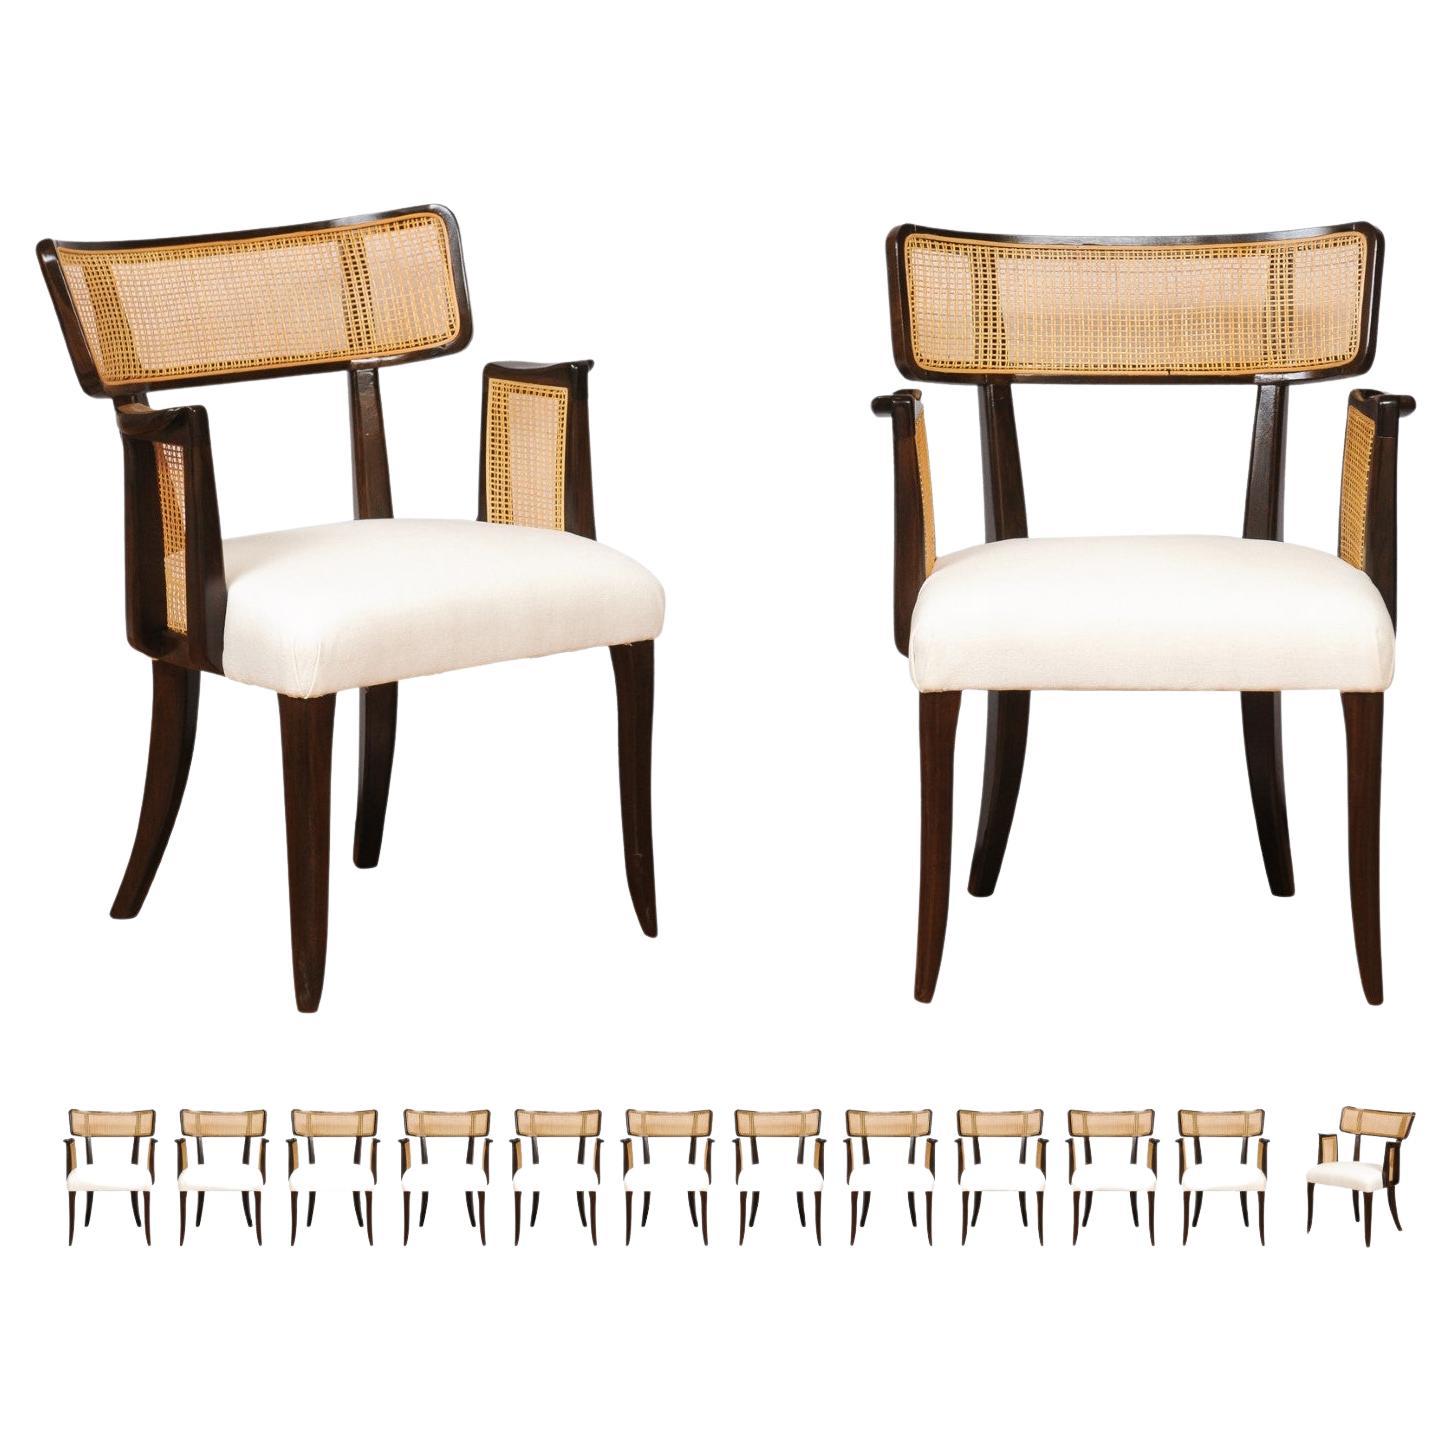 All Arms- Miraculous Set of 14 Arm Klismos Cane Dining Chairs by Edward Wormley For Sale